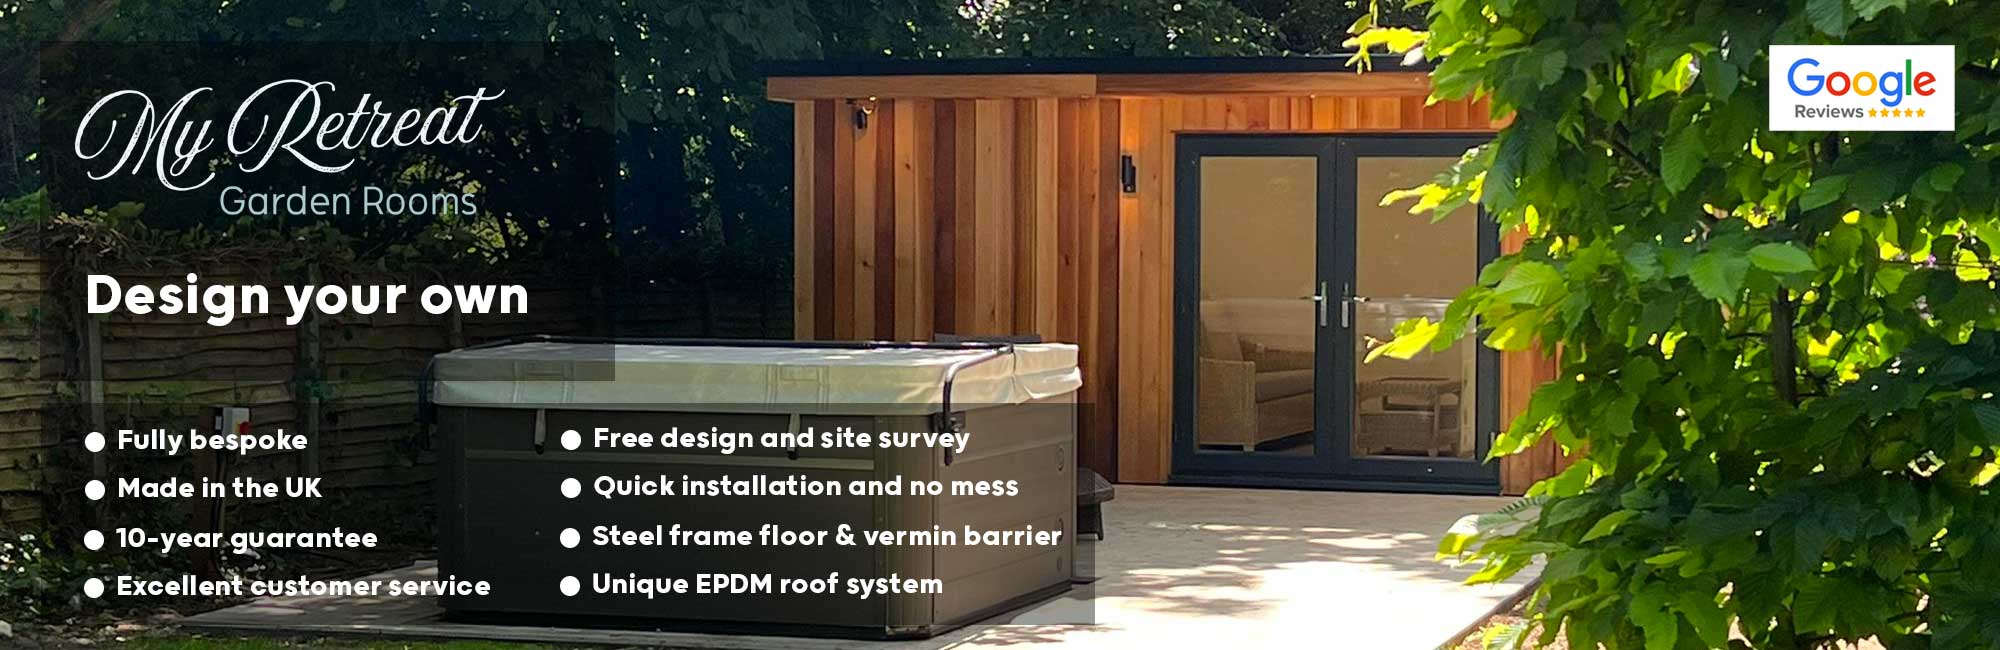 Secluded garden room retreat with a lounge and changing room next to a hot tub, finished with Western Red Cedar with shades of reddish brown mixed with dark brown and light rich tones.